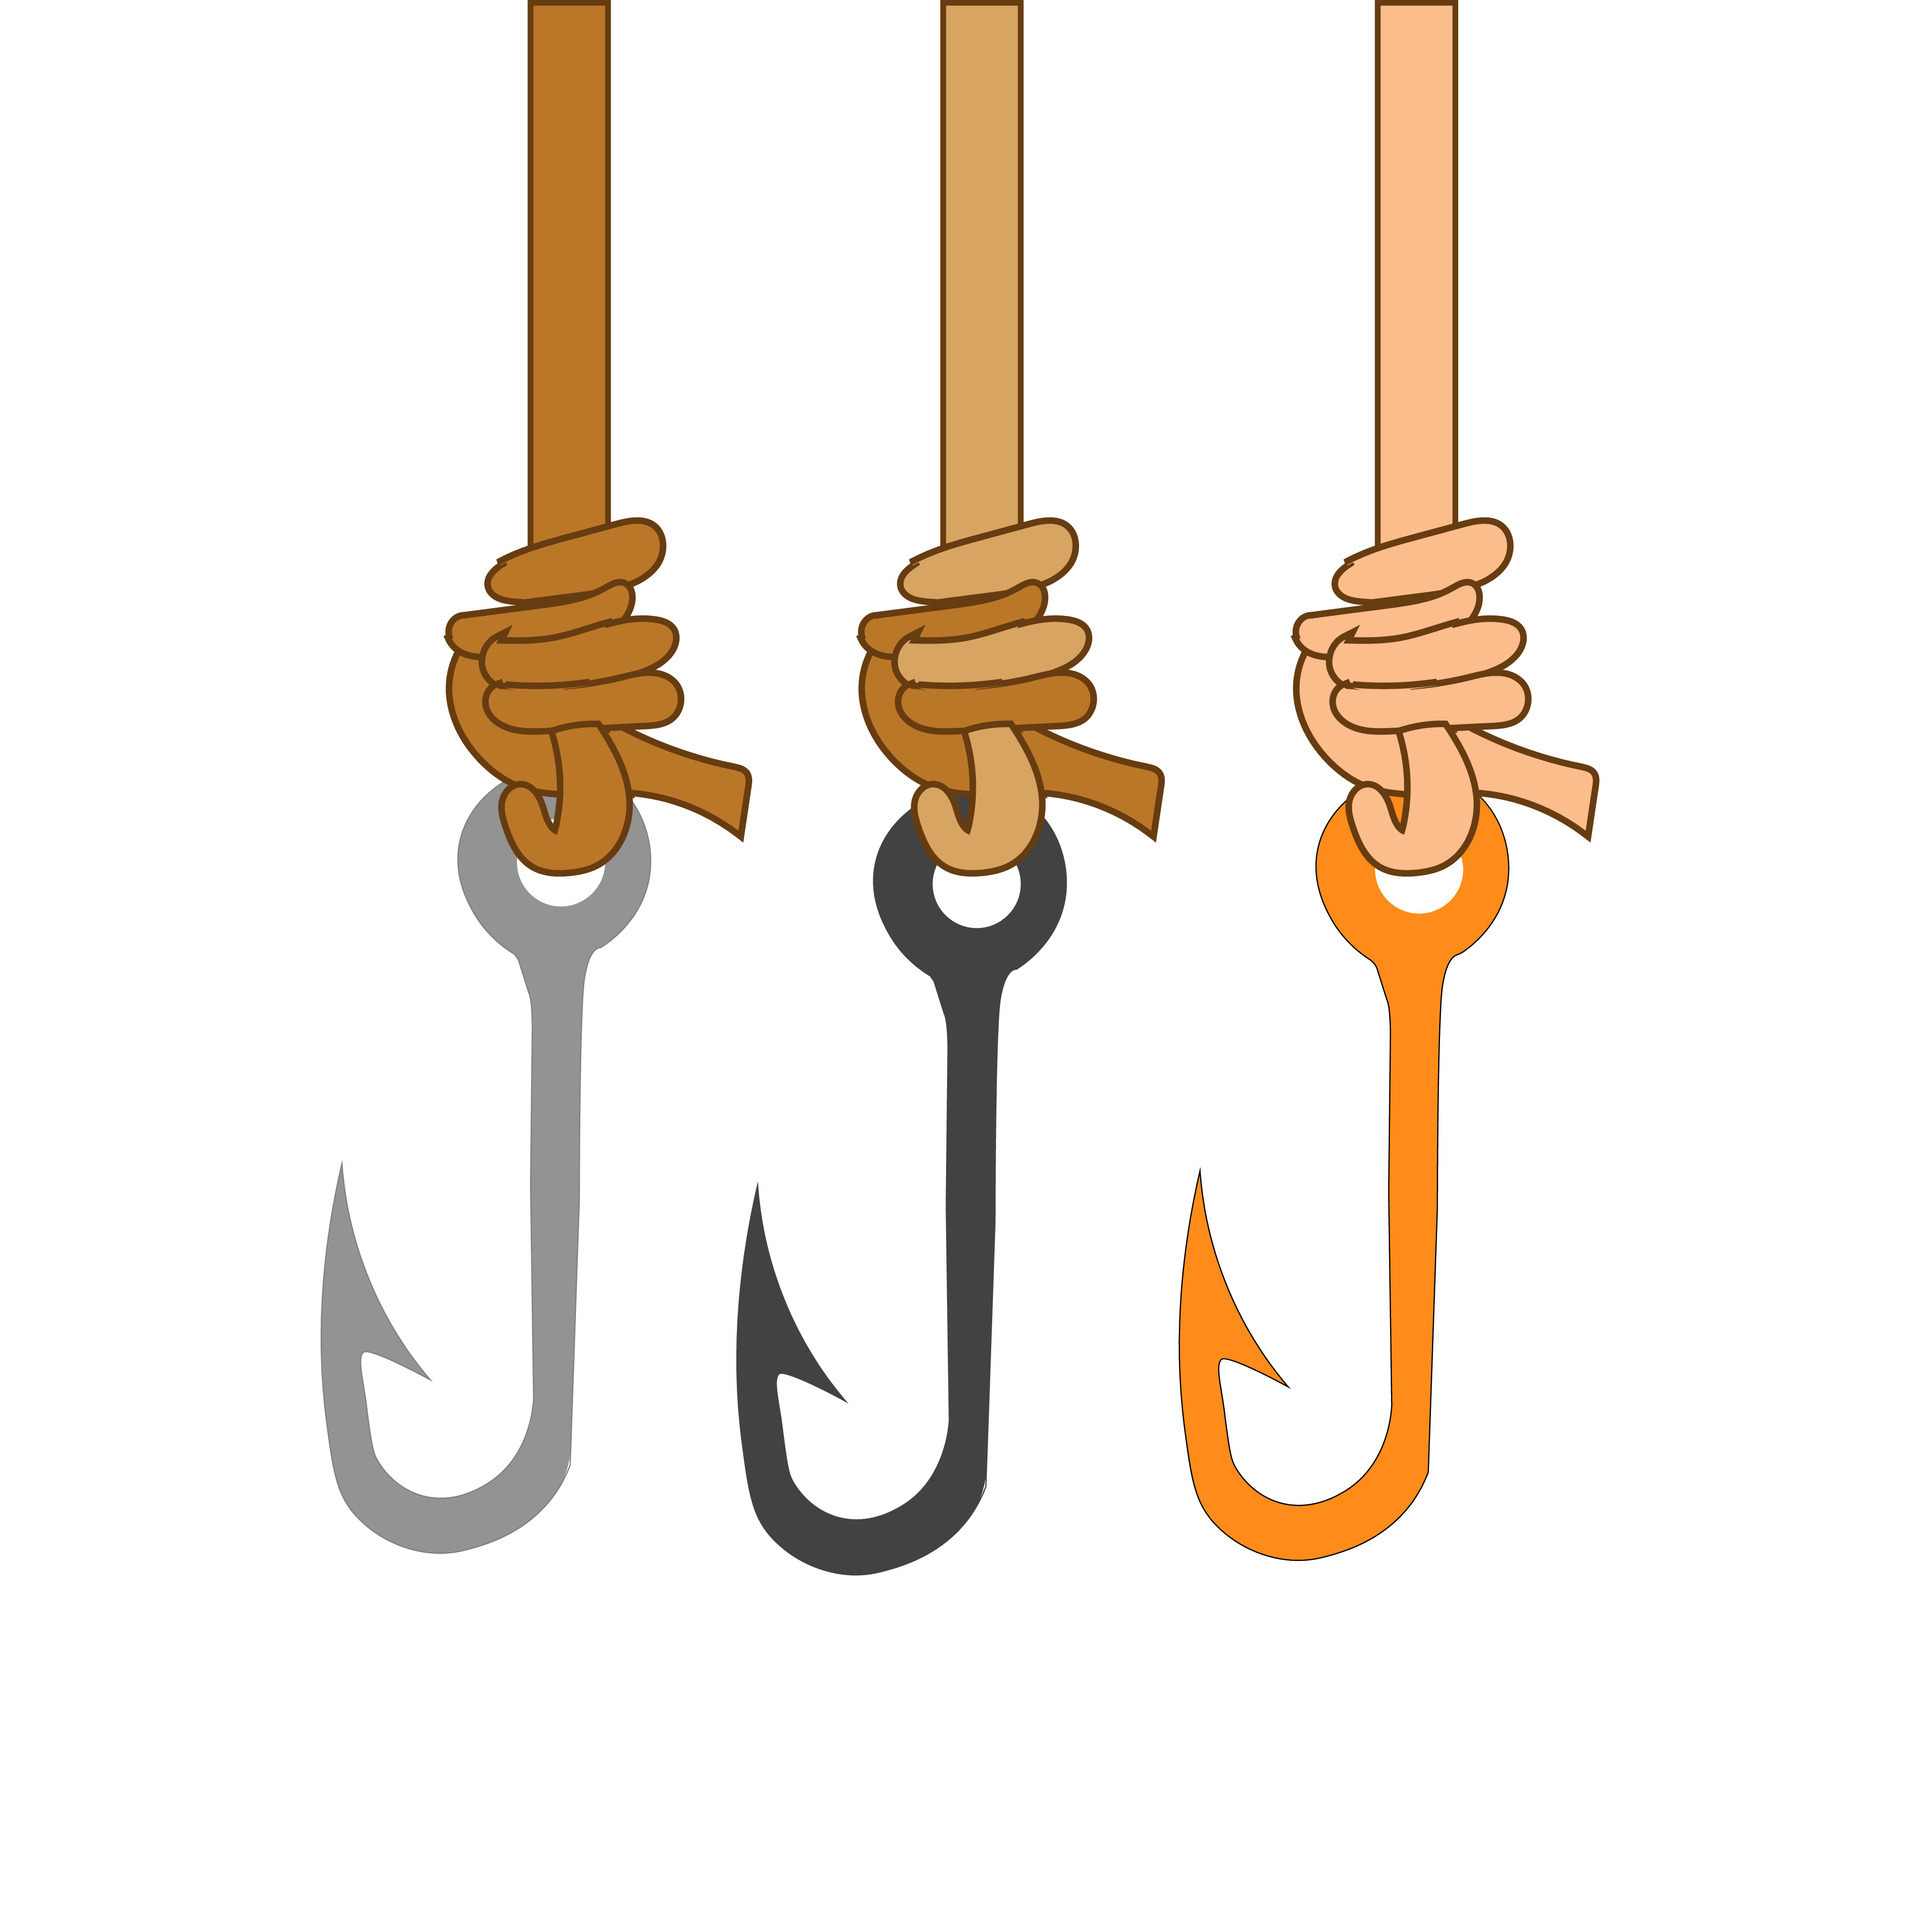 https://static.vecteezy.com/system/resources/previews/025/420/571/original/fishing-hooks-for-hanging-lures-illustration-set-with-isolate-on-white-background-hook-2d-style-vintage-style-colorful-clip-art-isolated-on-white-background-vector.jpg